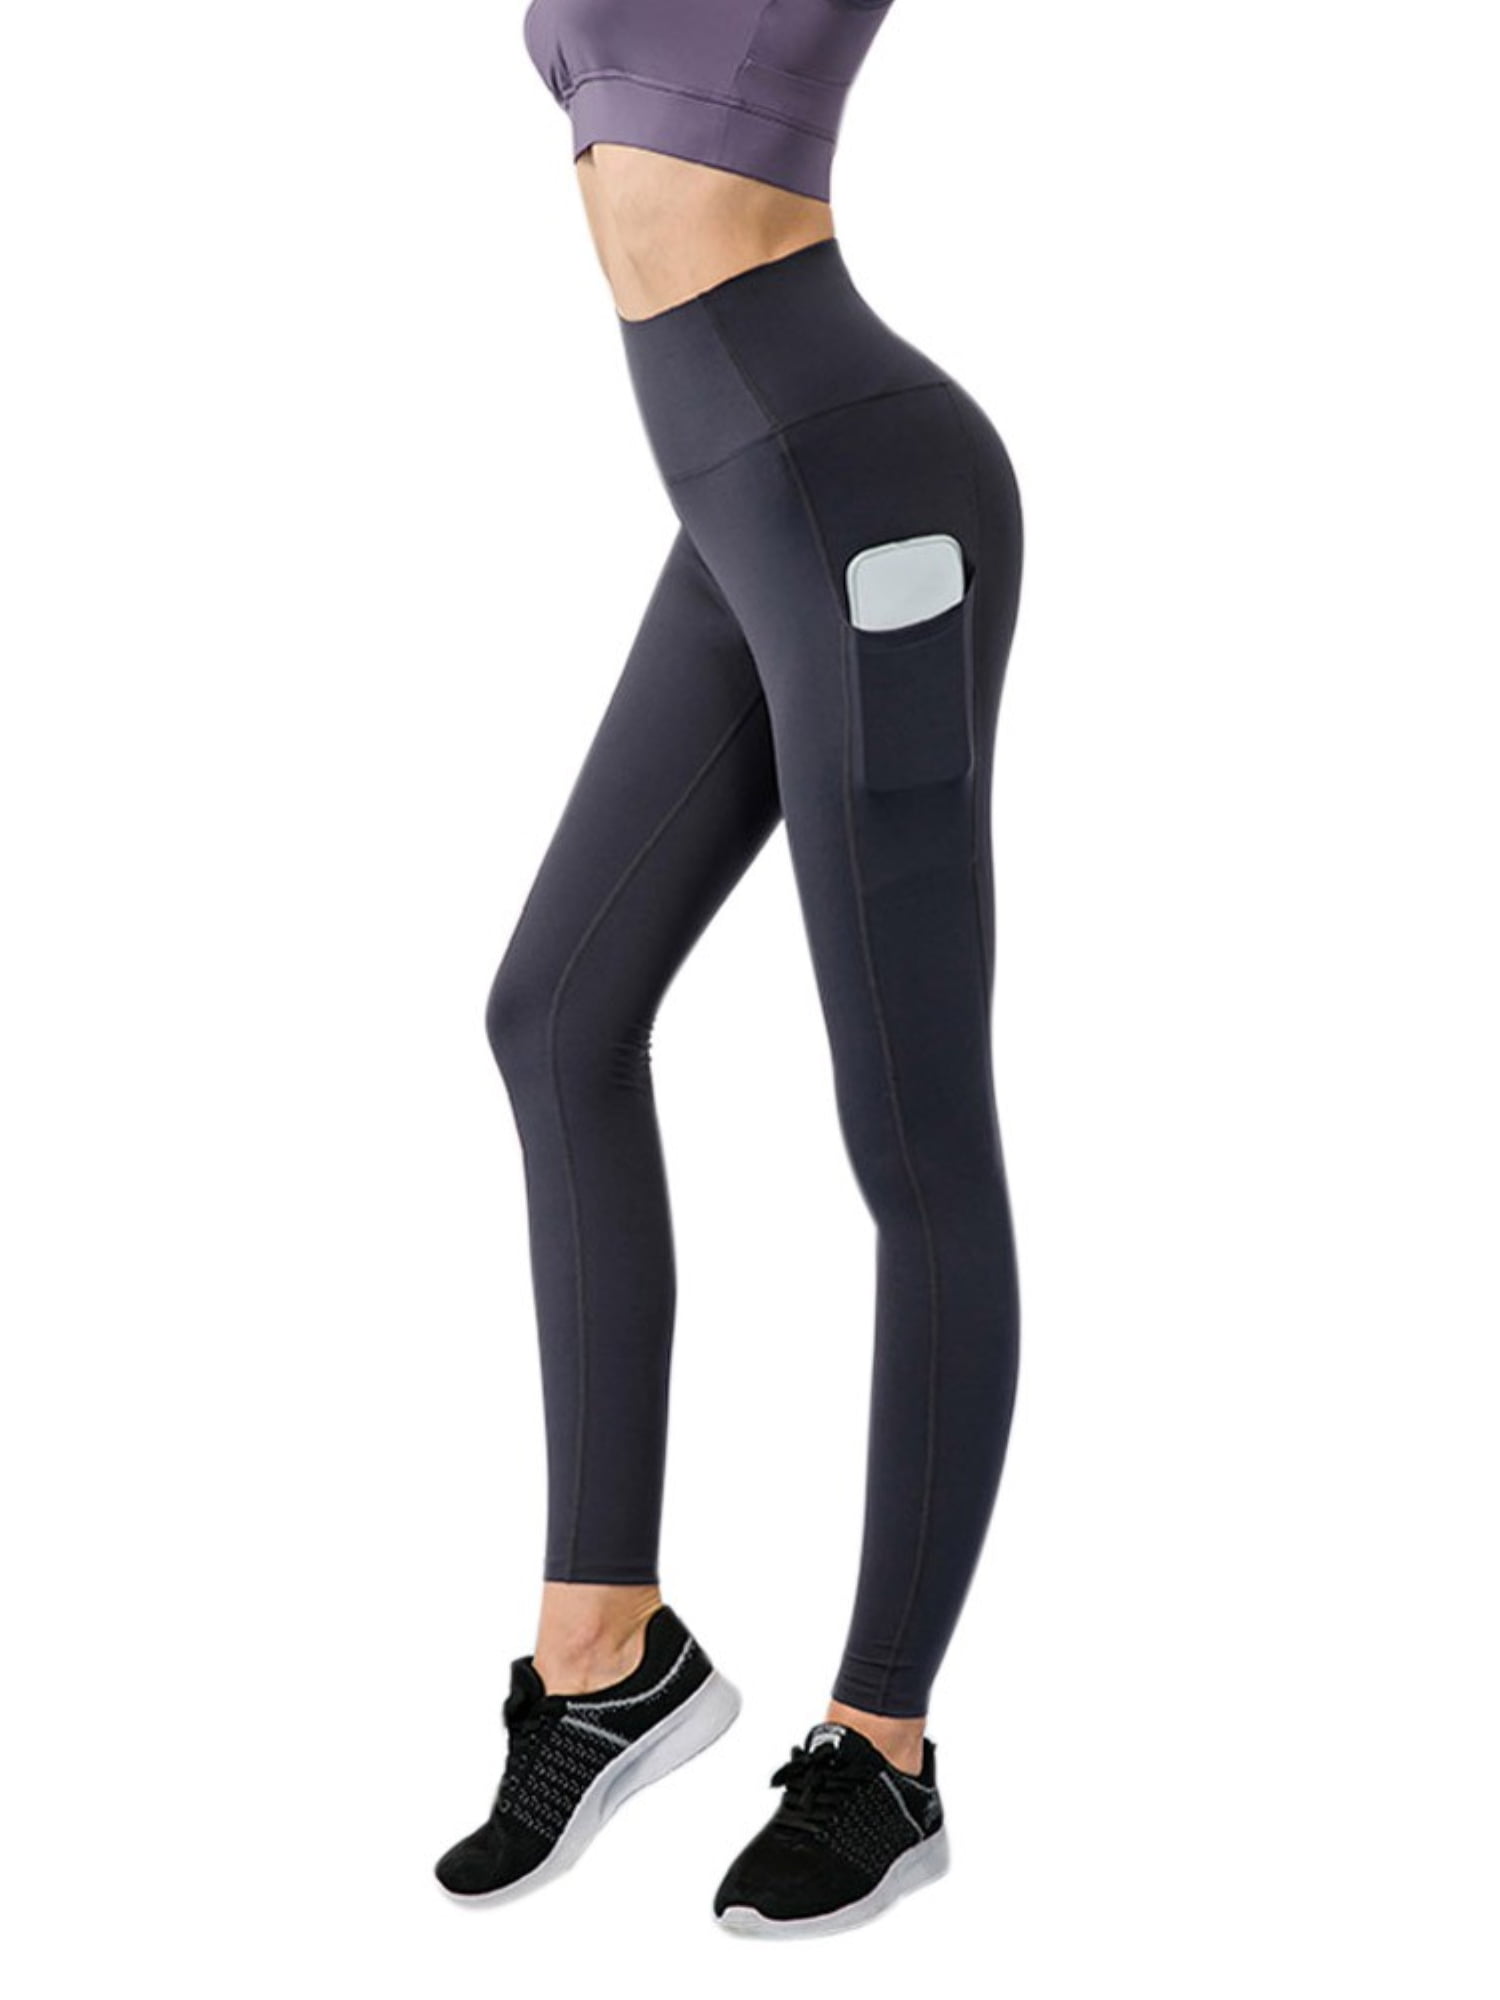 Black Leggings with Pockets for Women Tummy Control Yoga Pants with Pockets  for